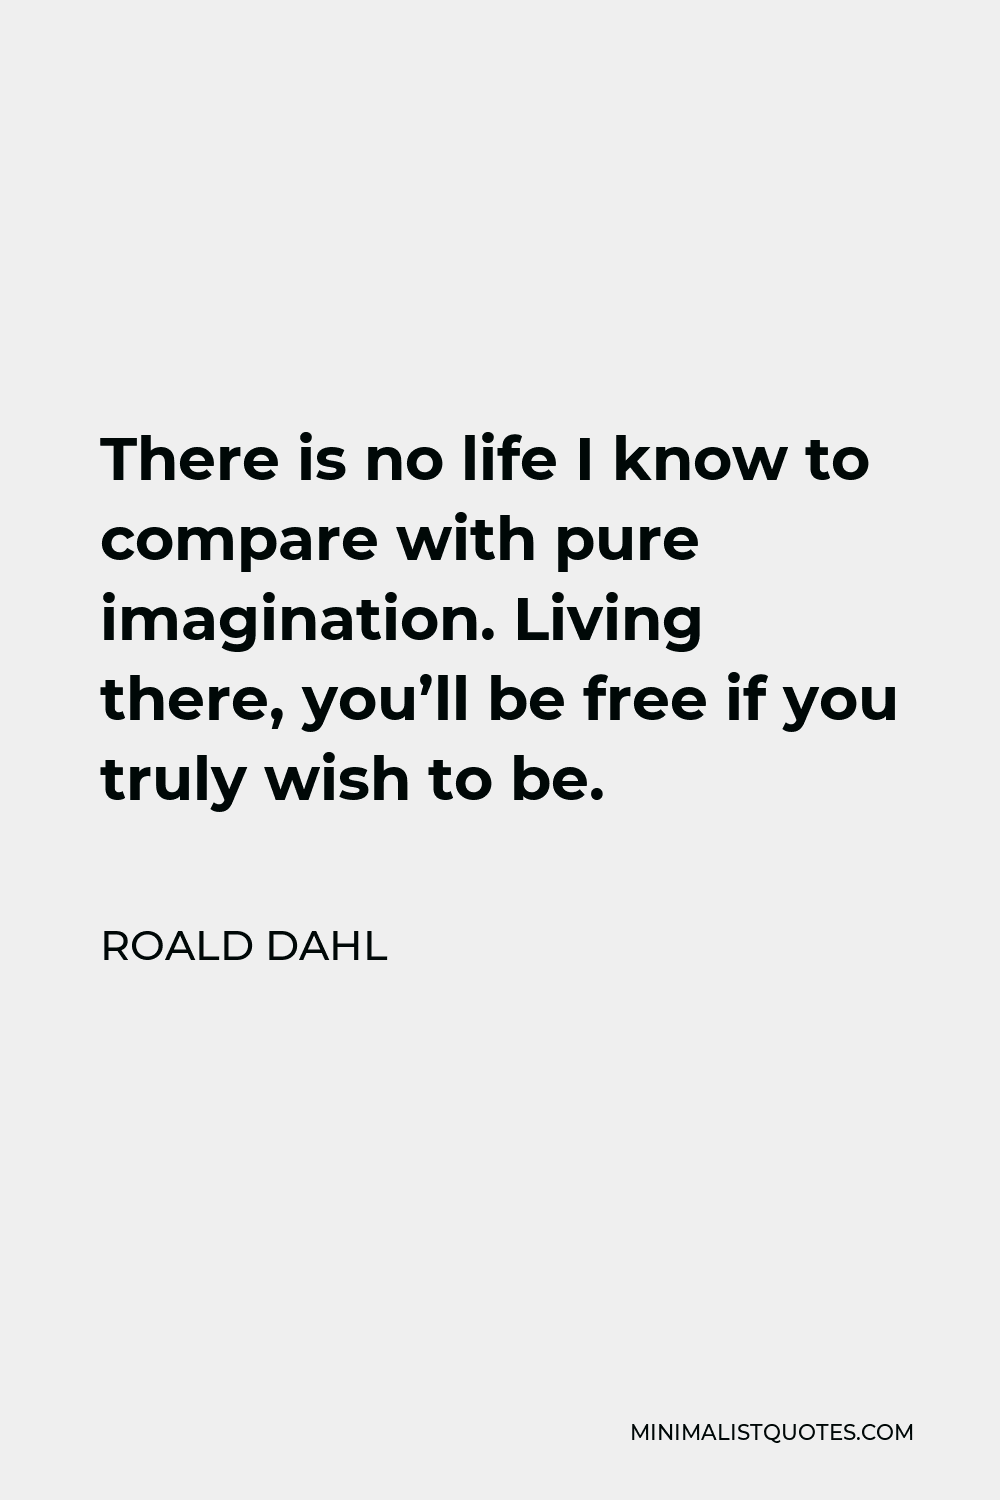 Roald Dahl Quote - There is no life I know to compare with pure imagination. Living there, you’ll be free if you truly wish to be.